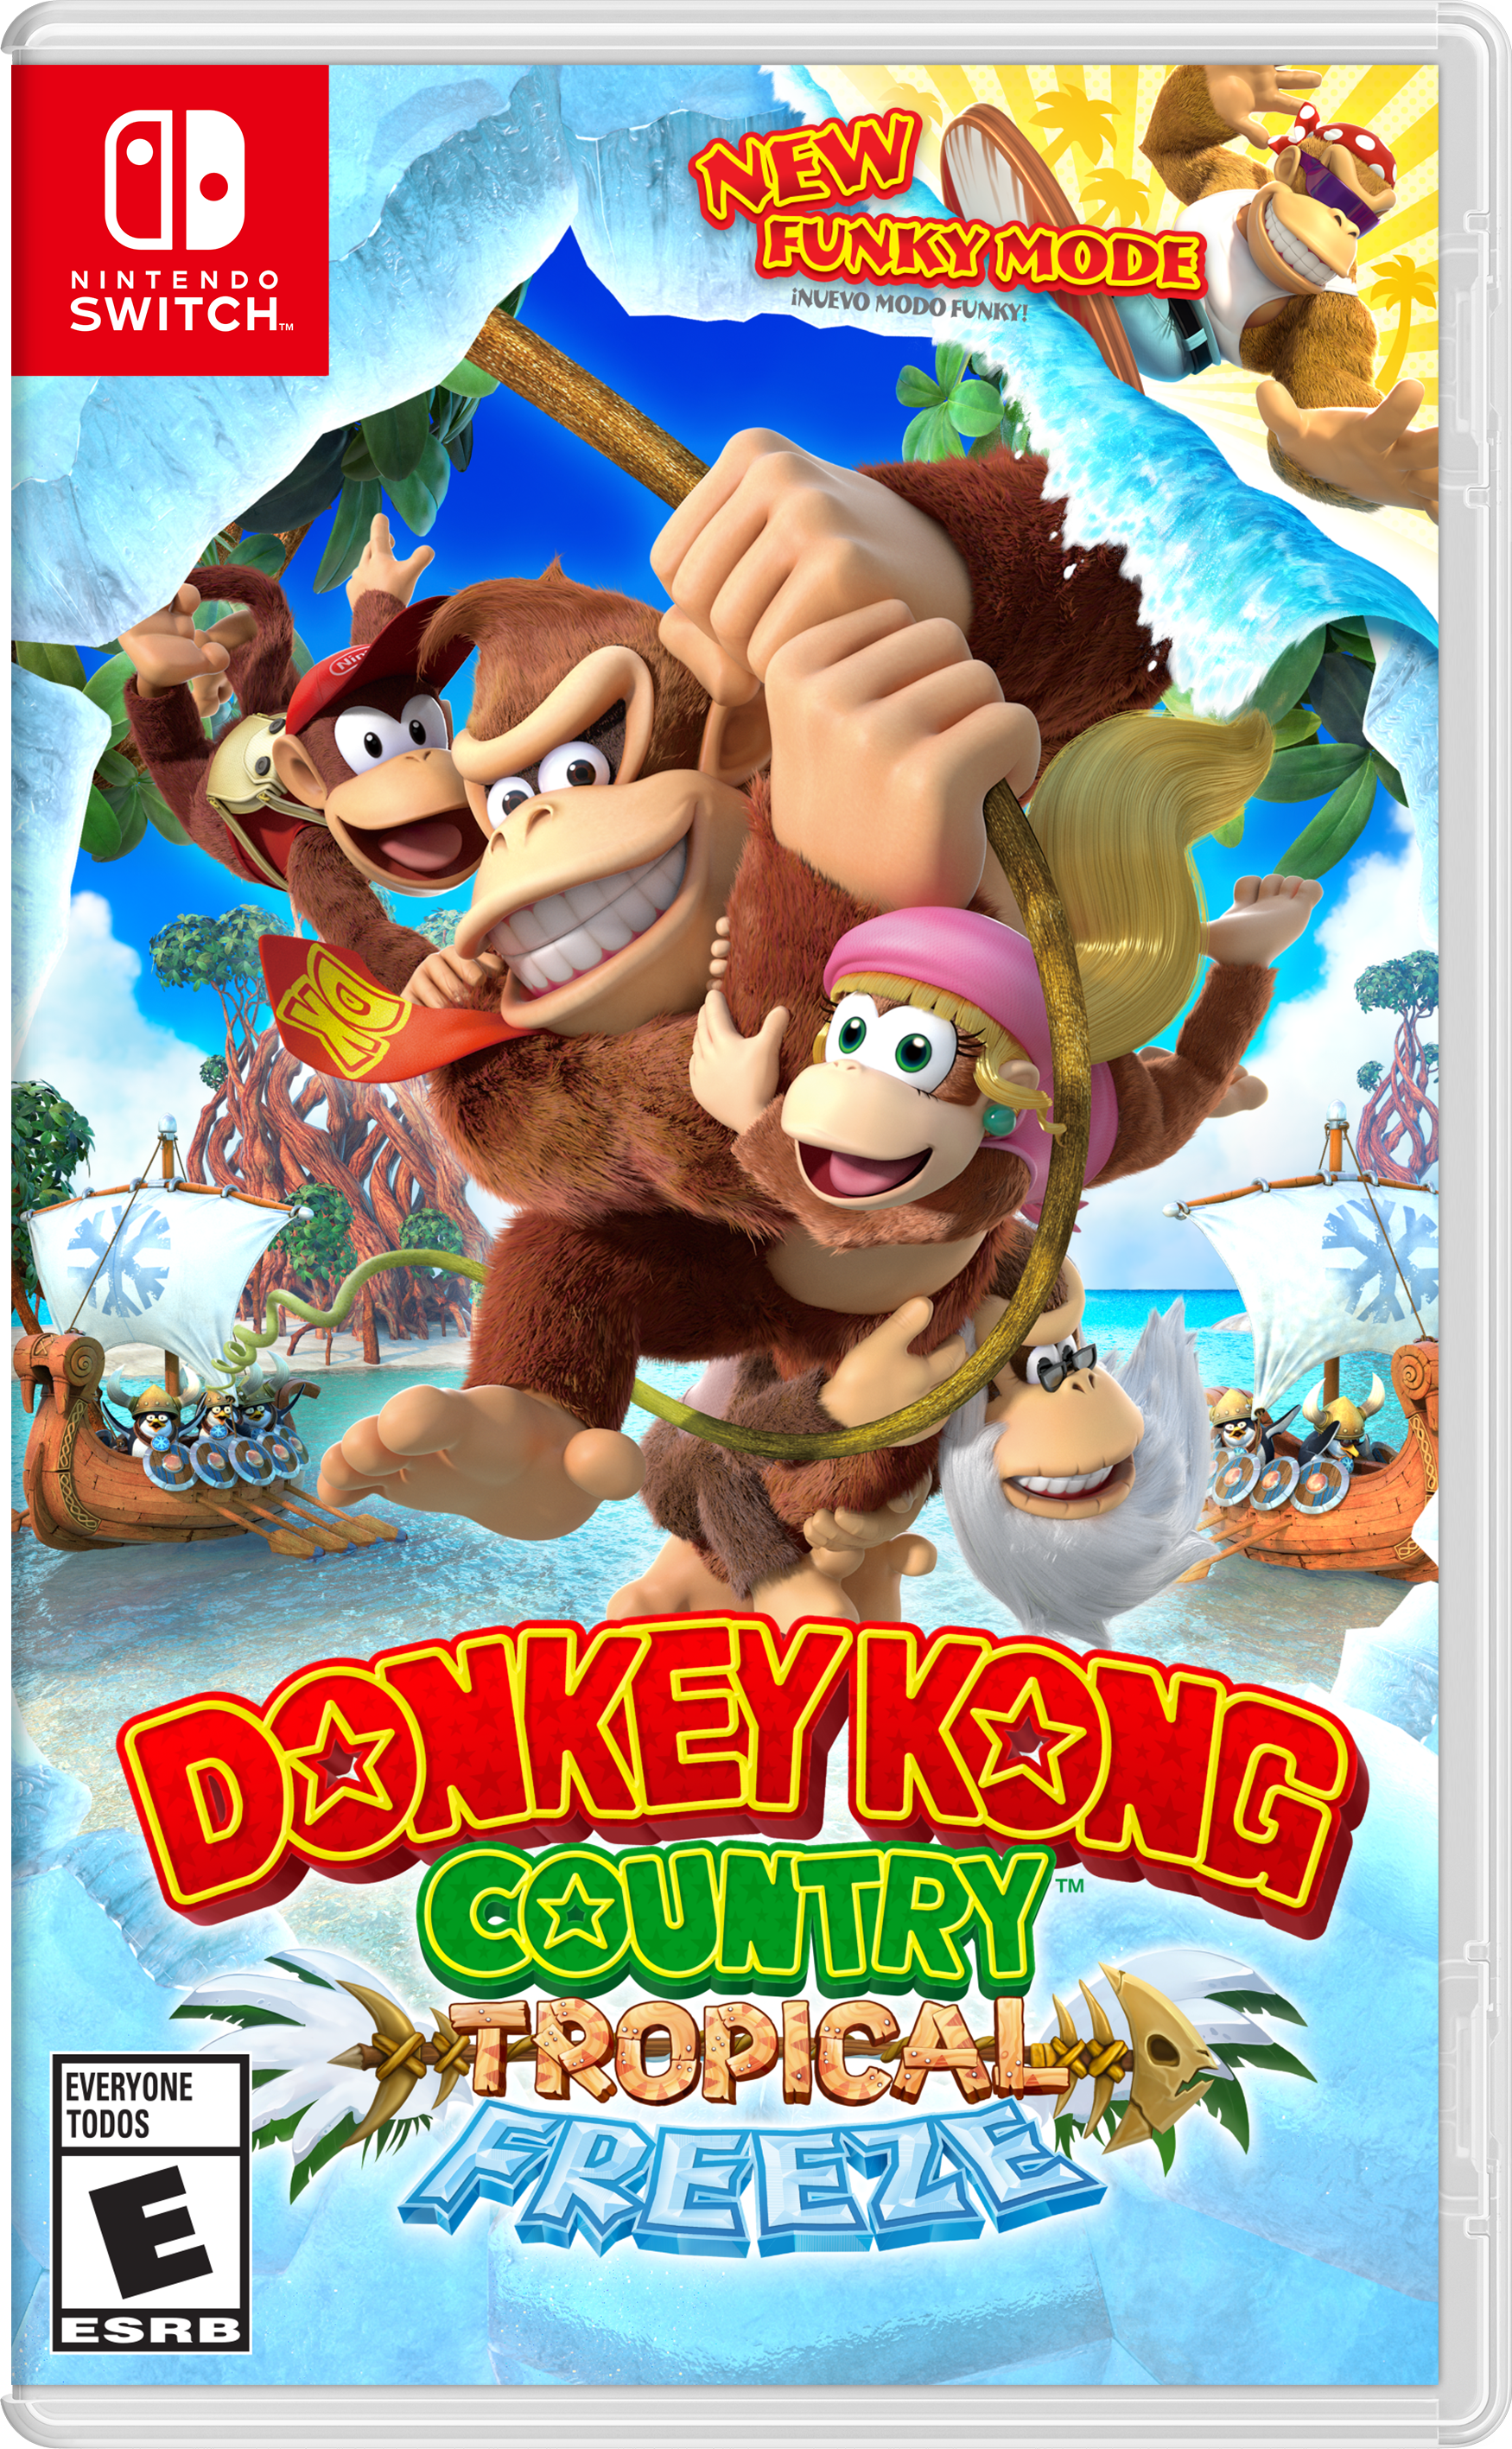 DKCTF_Switch_cover_art.png